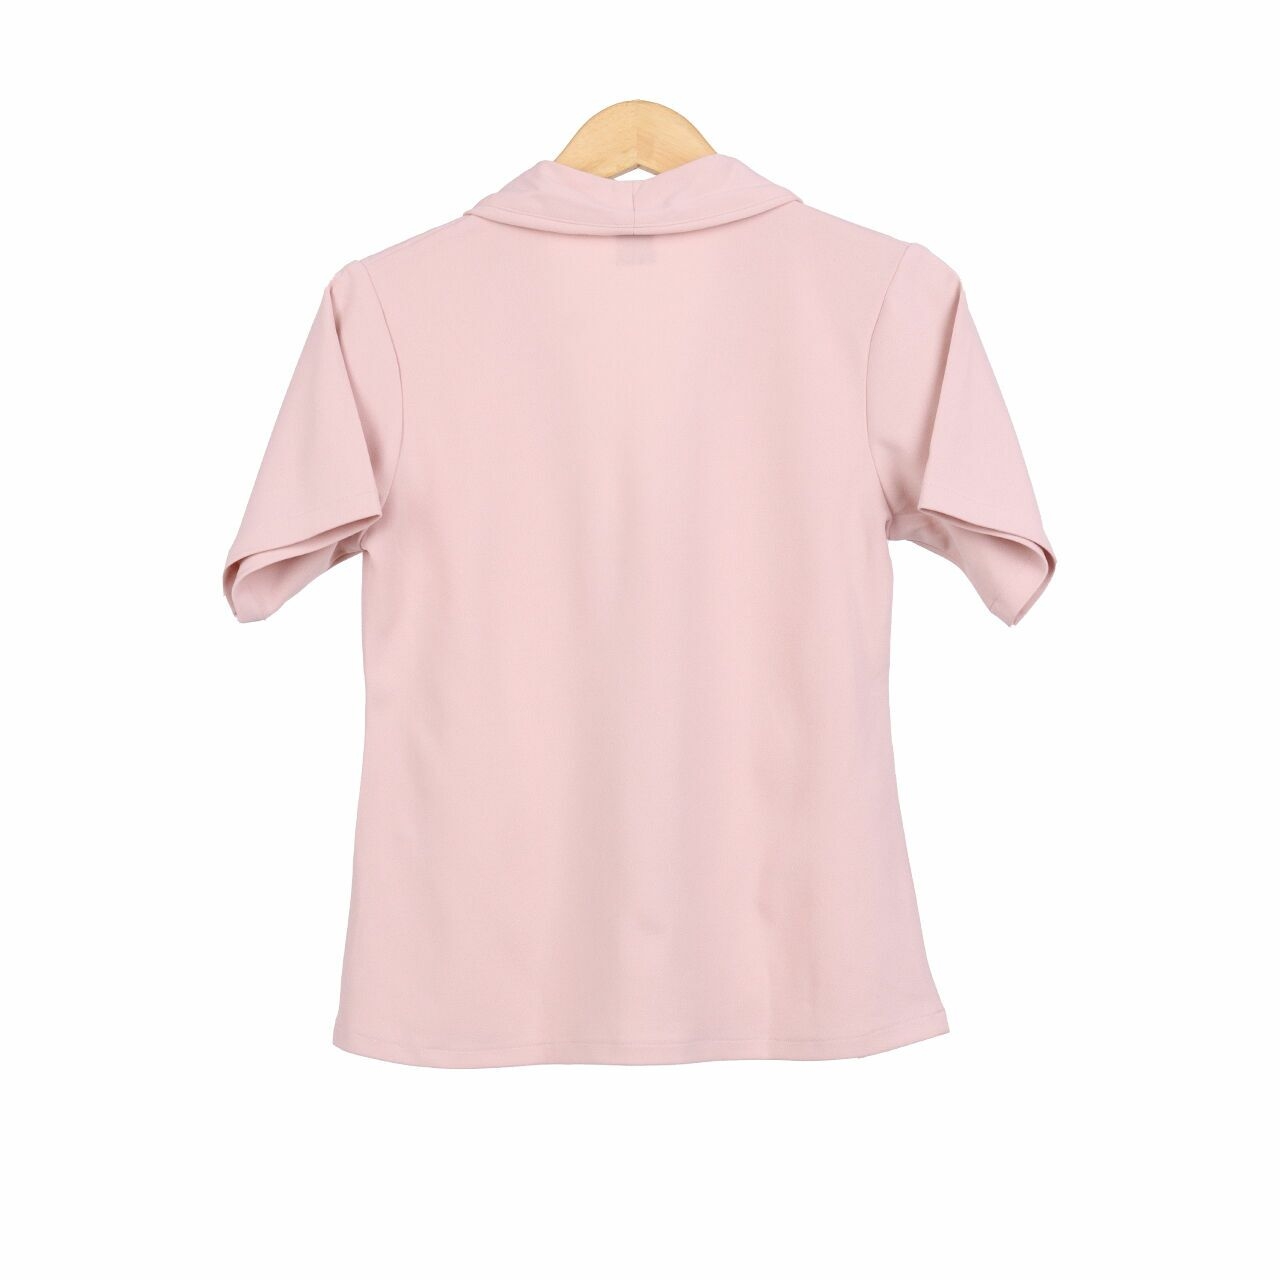 Day by Love And flair Soft Pink Blouse